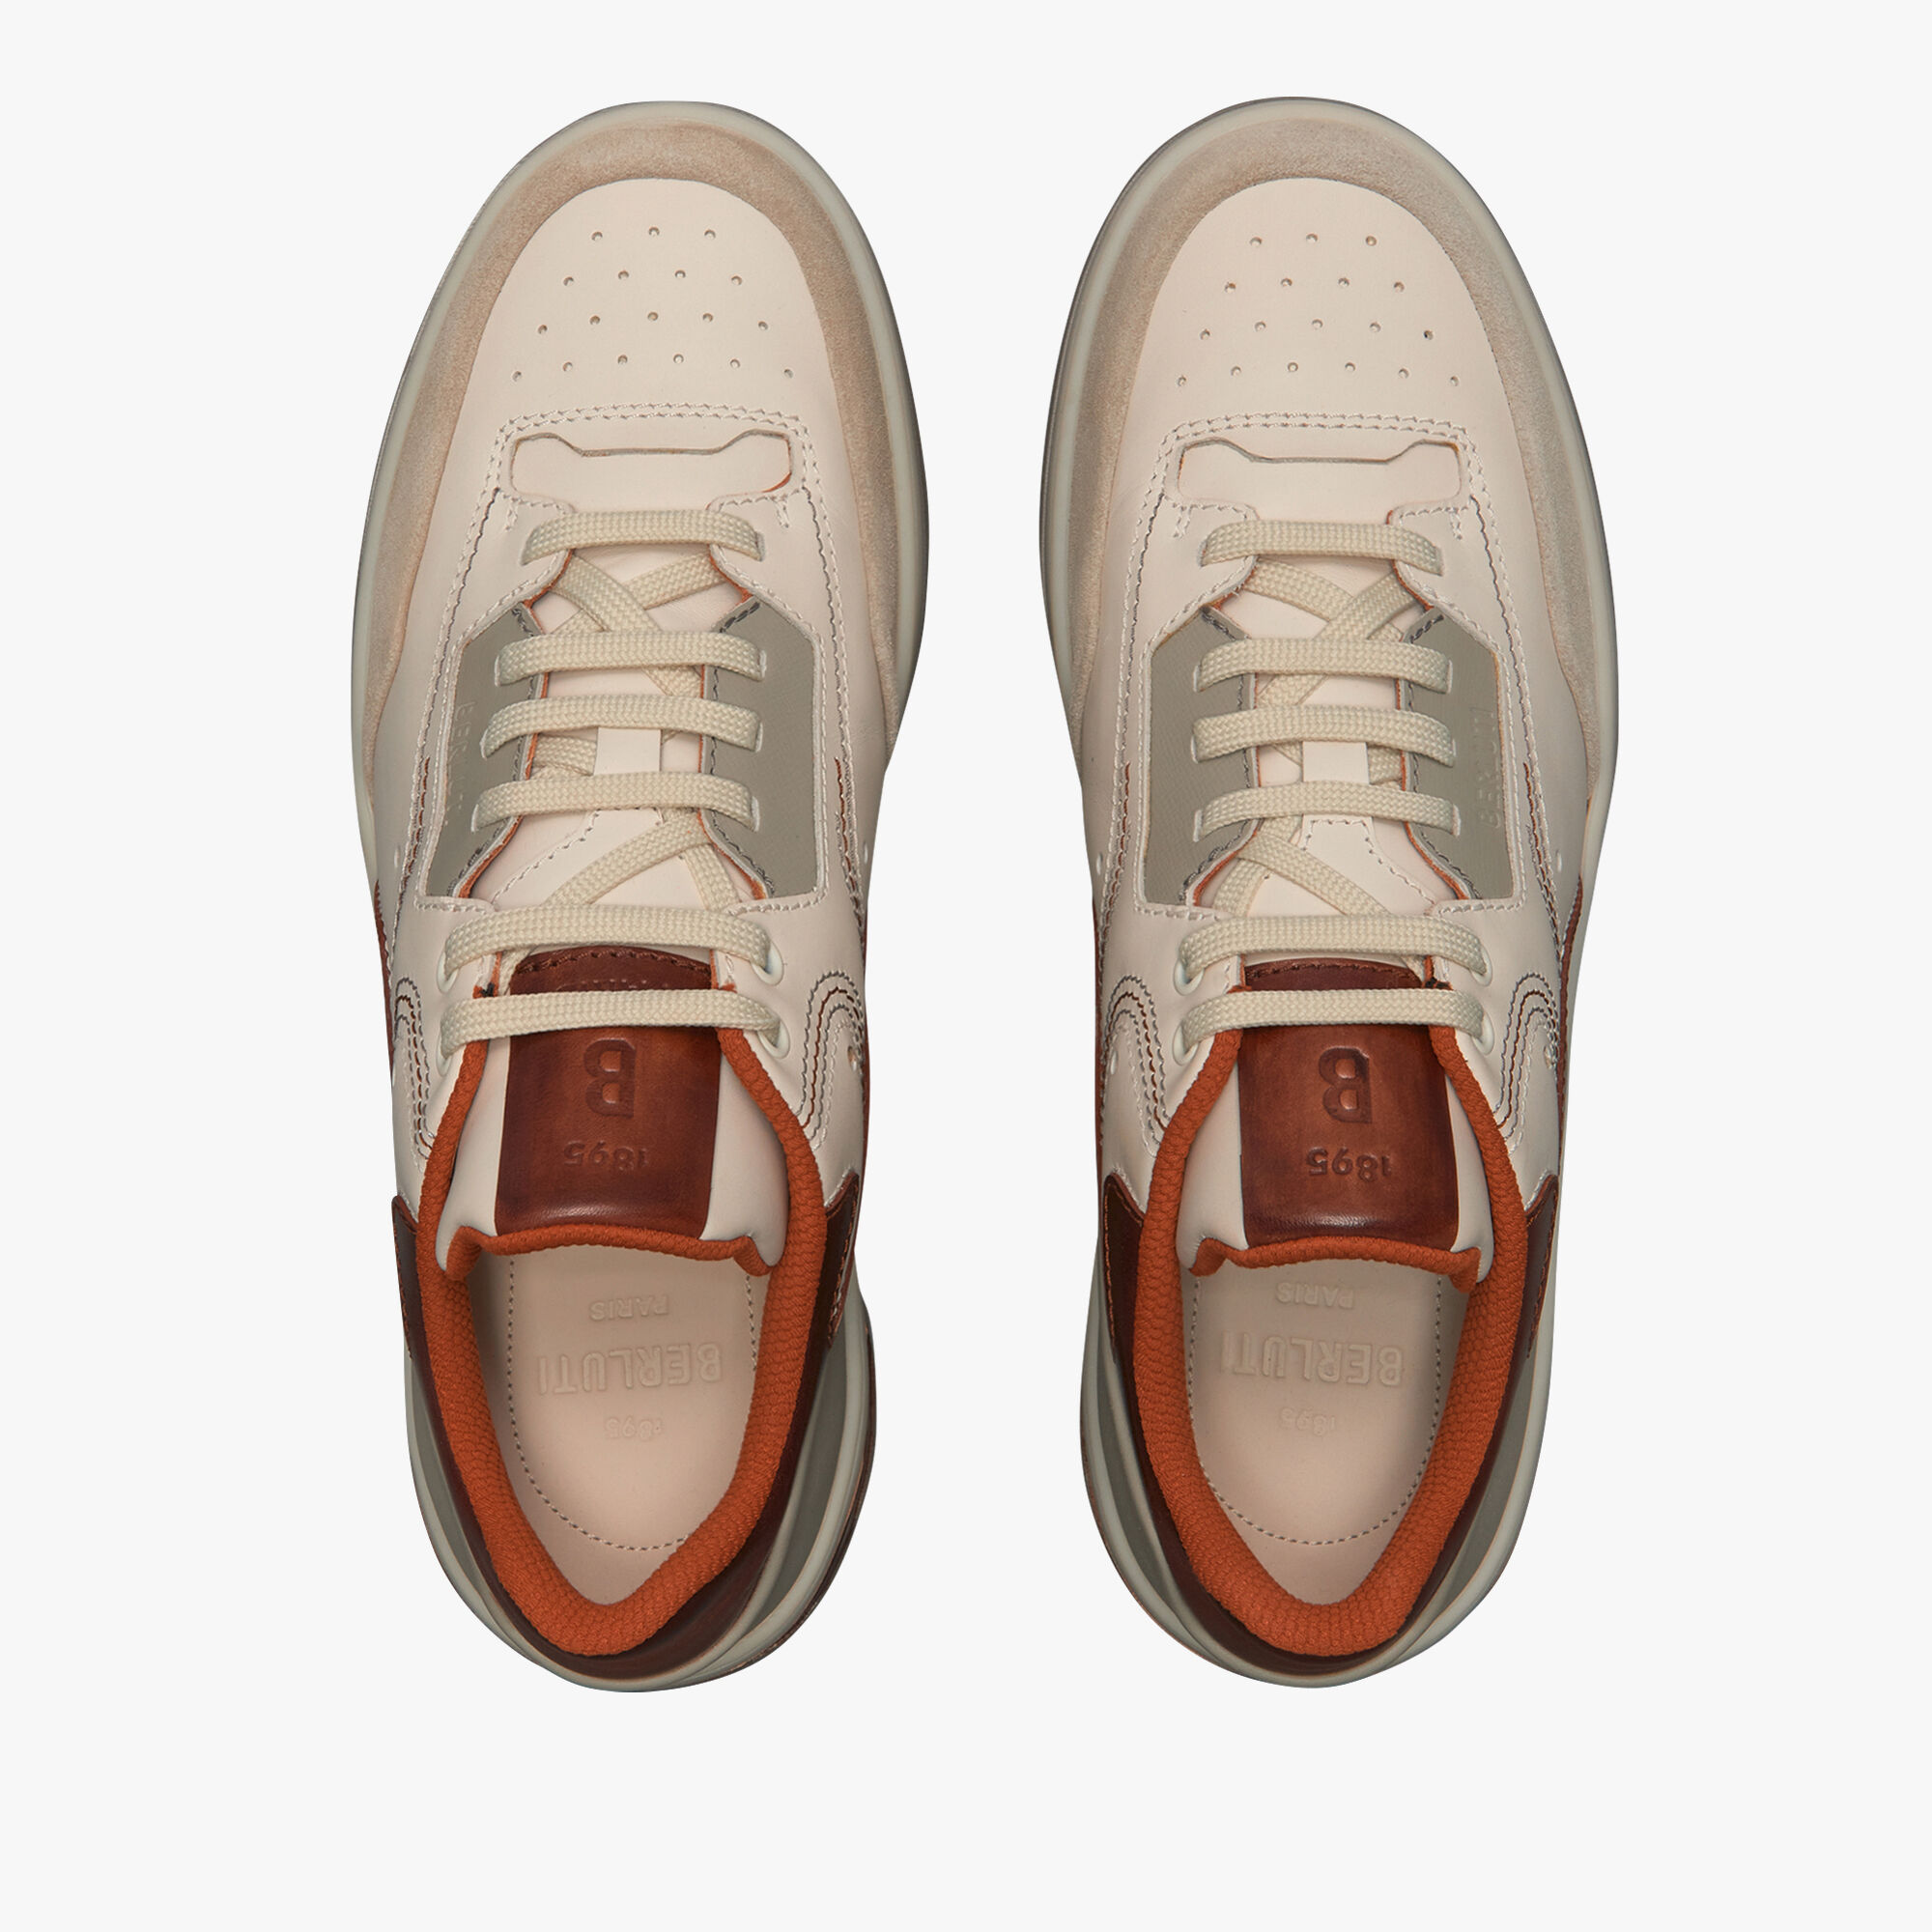 Playoff Leather Sneaker